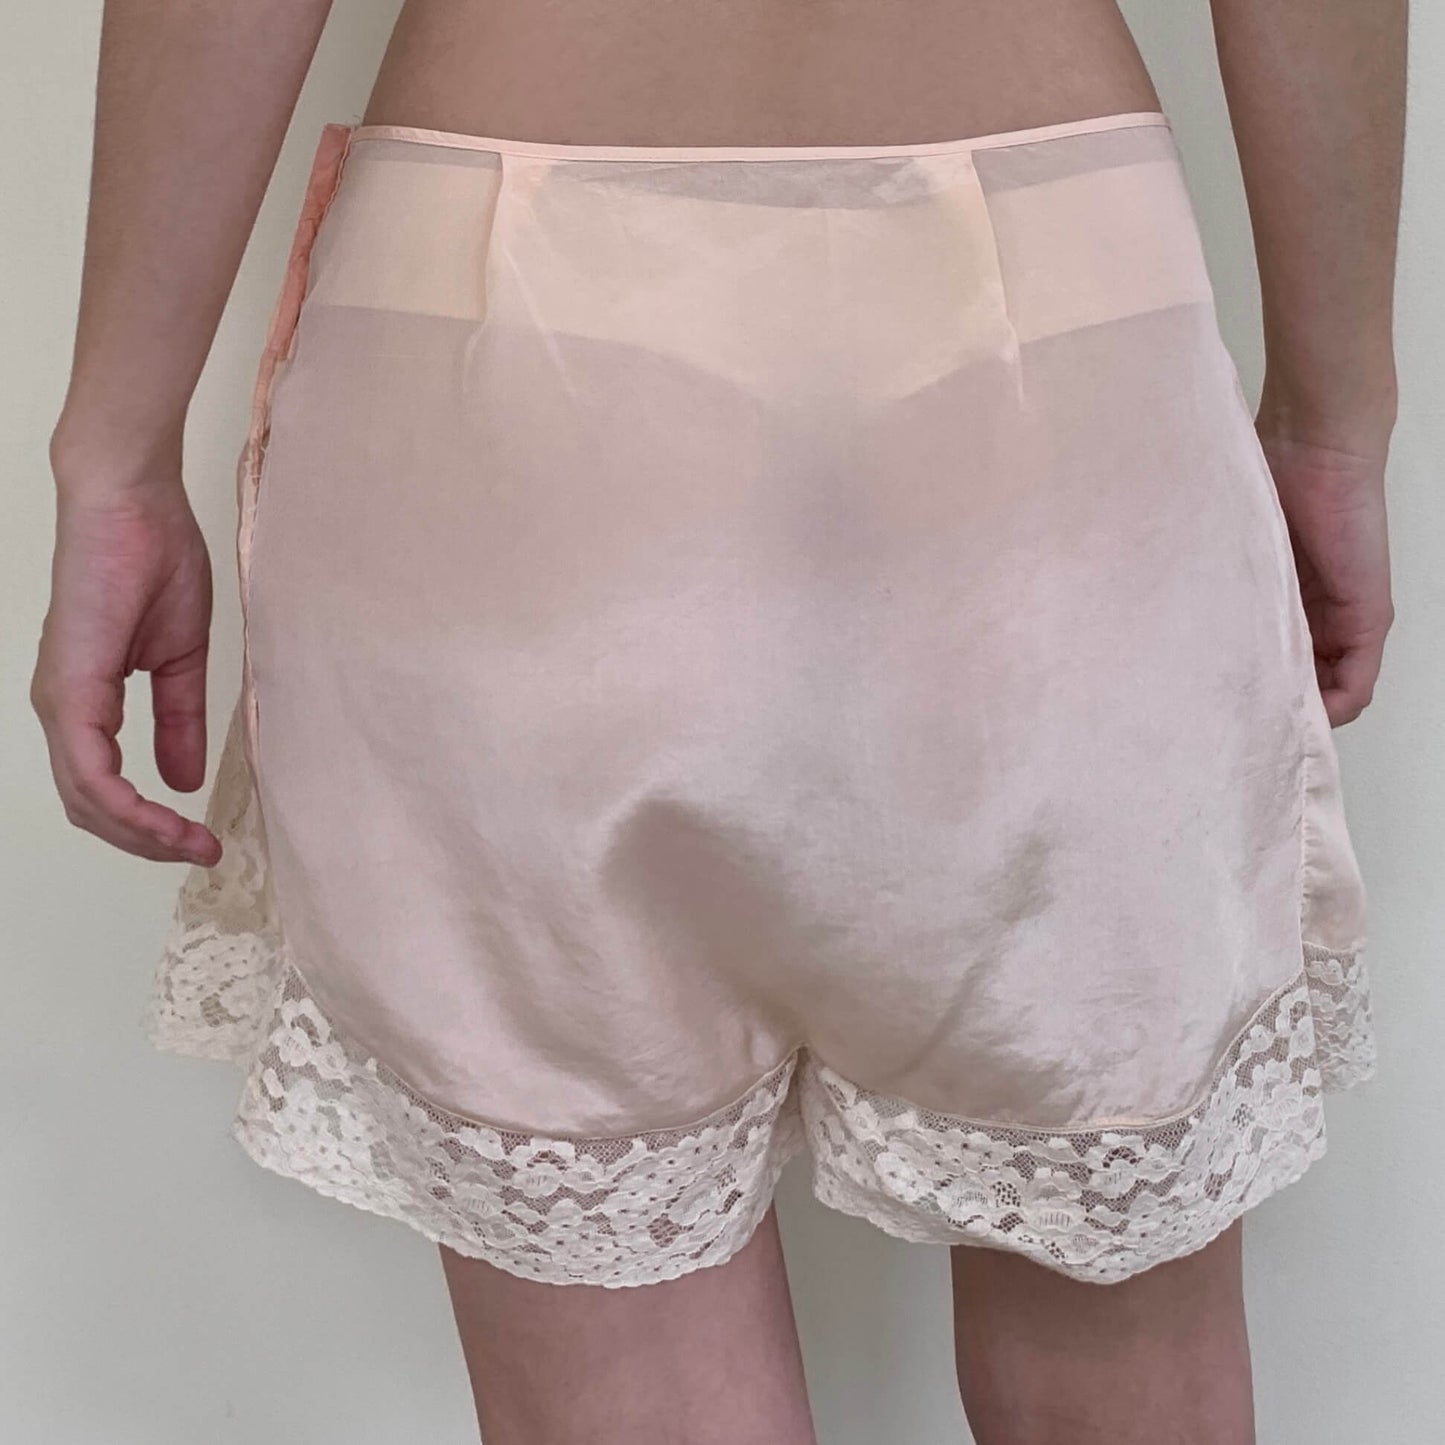 additional view of pink tap shorts